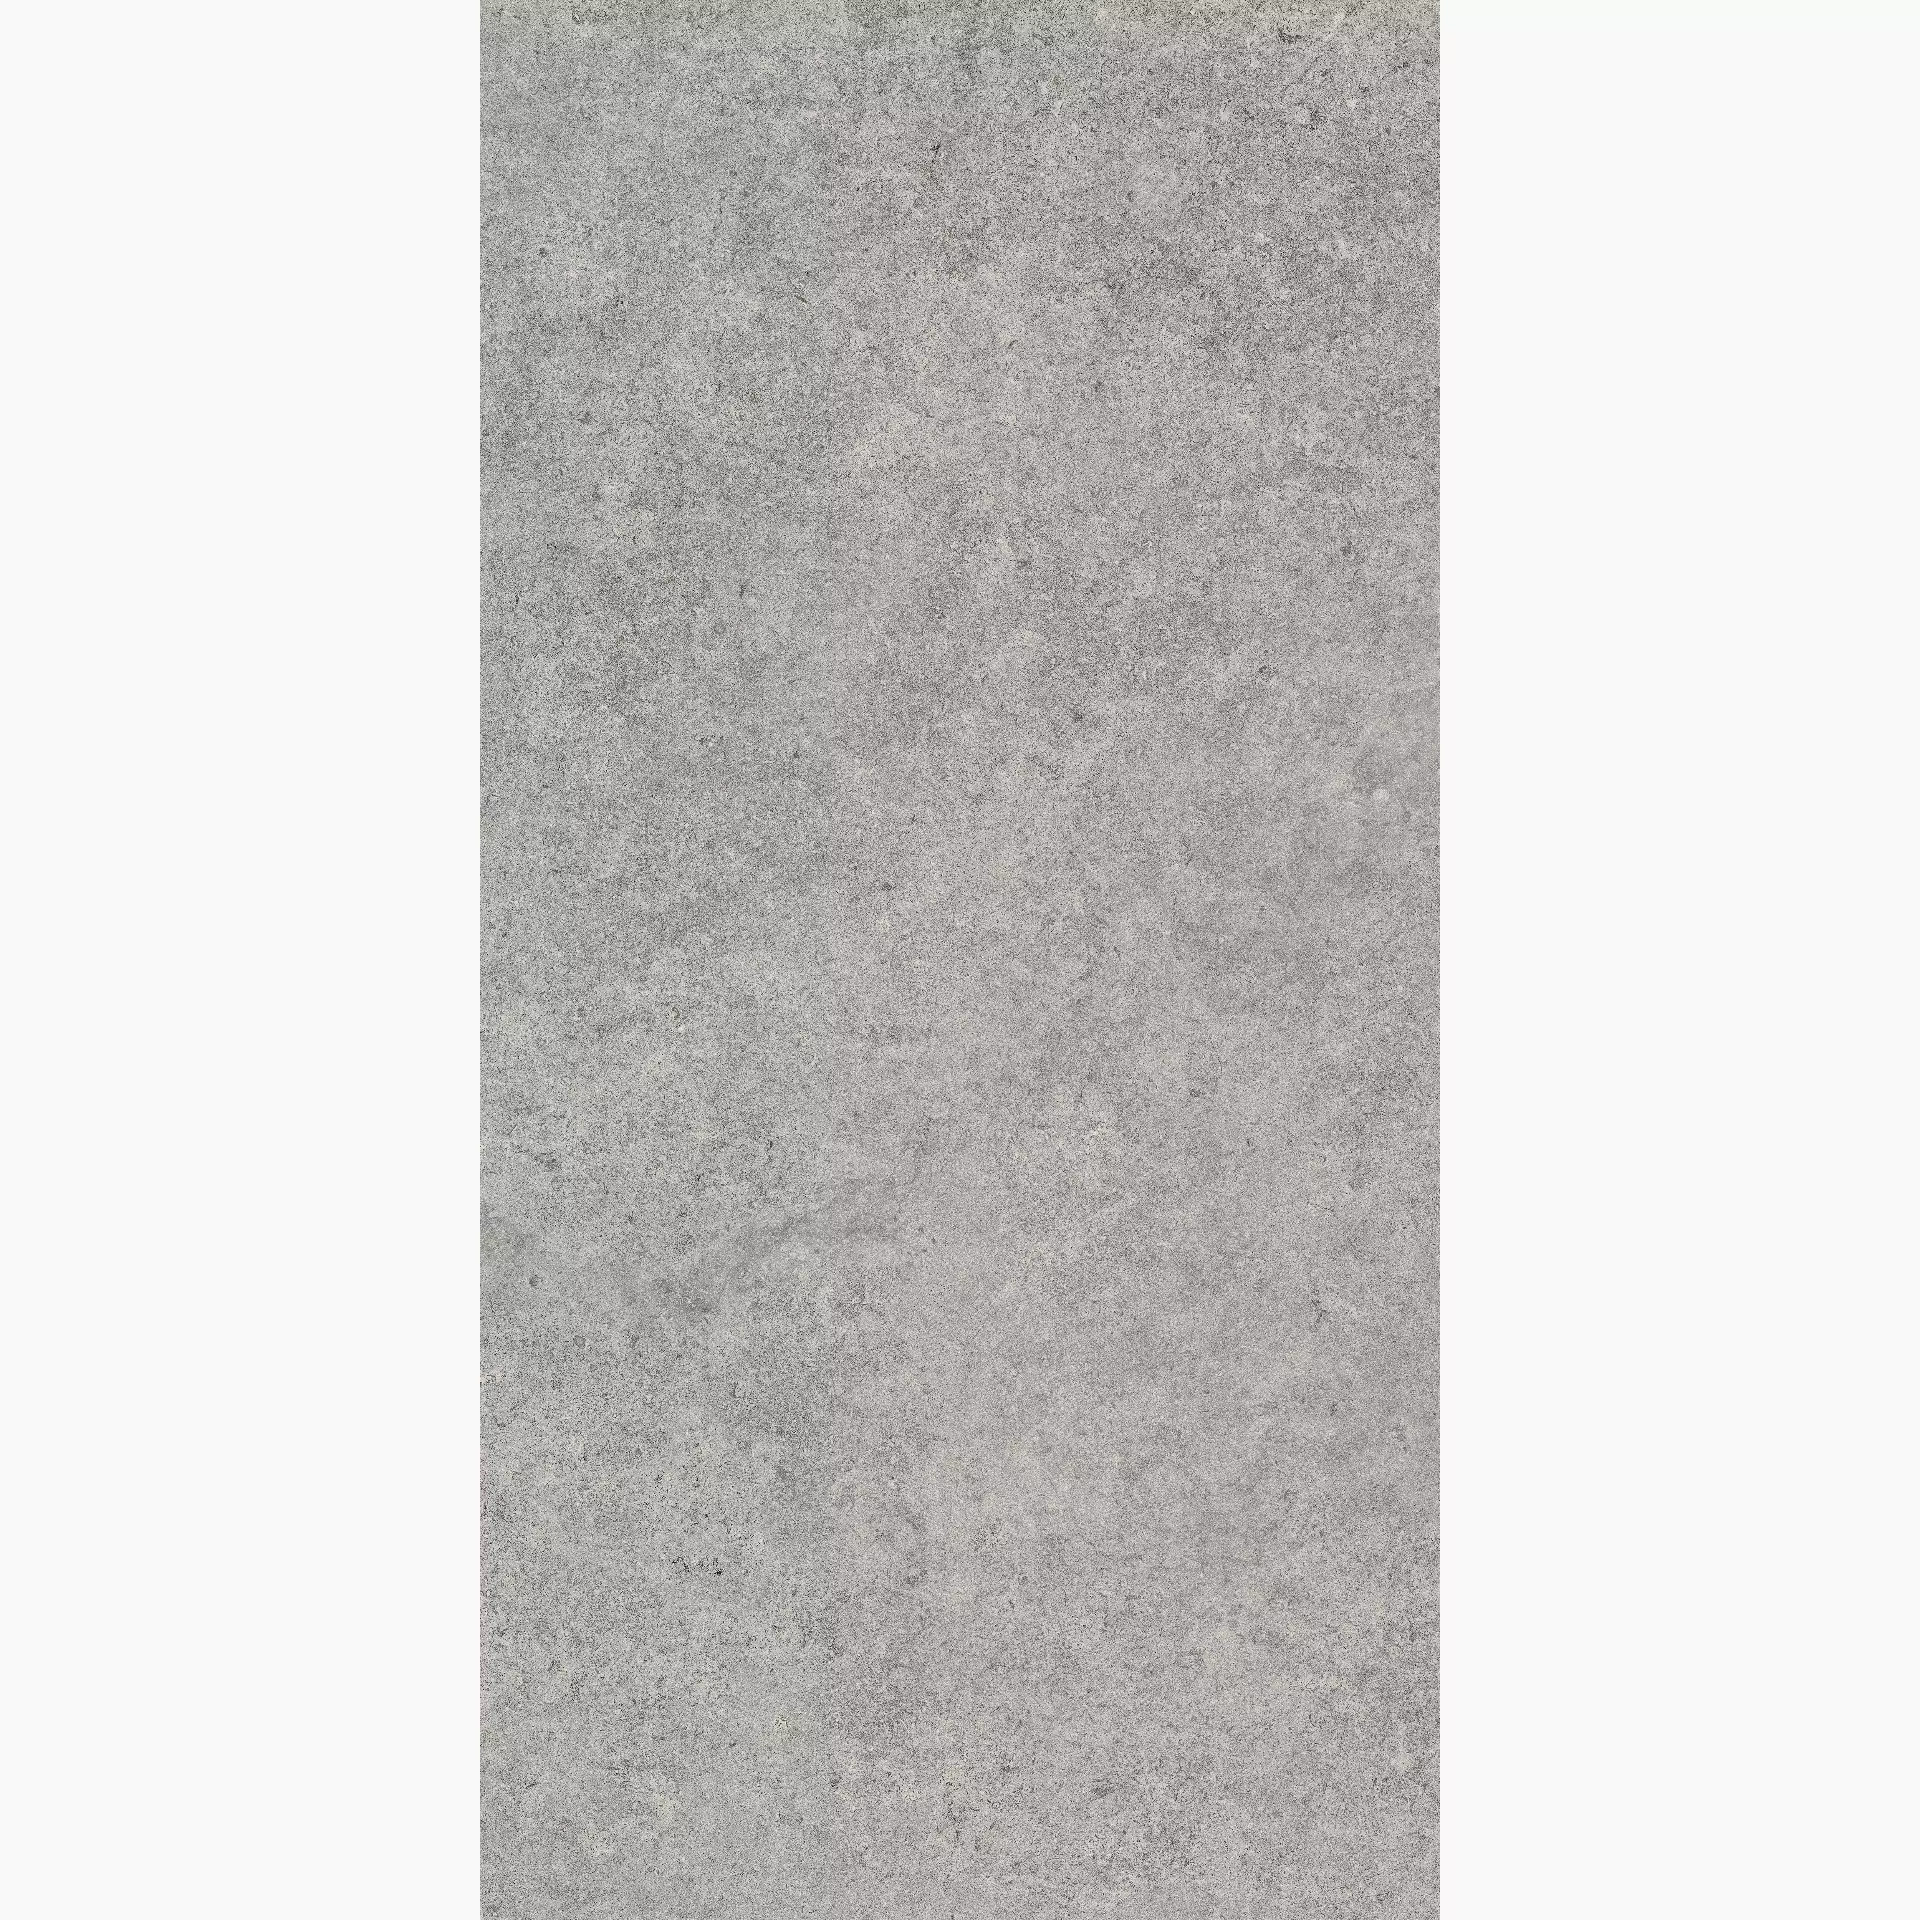 Cottodeste Pura Grey Hammered Protect EGXPR50 60x120cm rectified 20mm